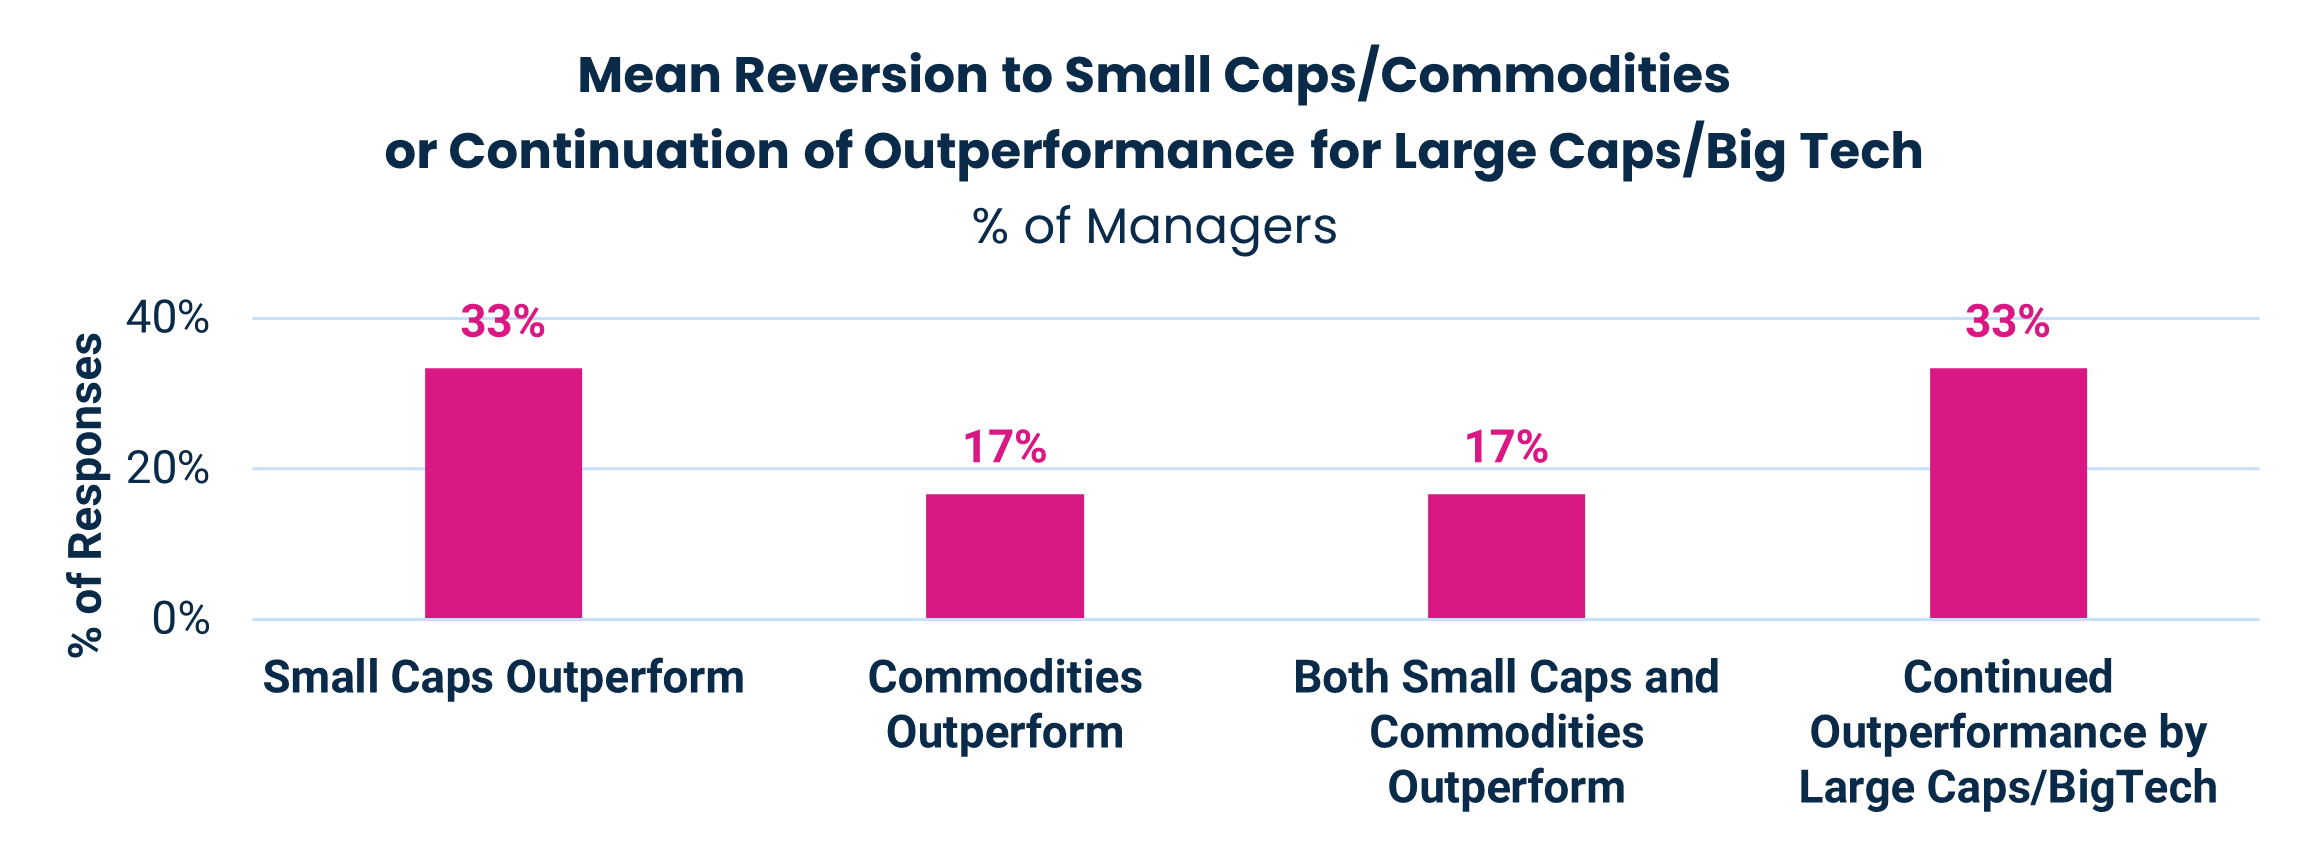 Mean Reversion to Small Caps/Commodities or Continuation of Outperformance for Large Caps/Big Tech
% of Managers